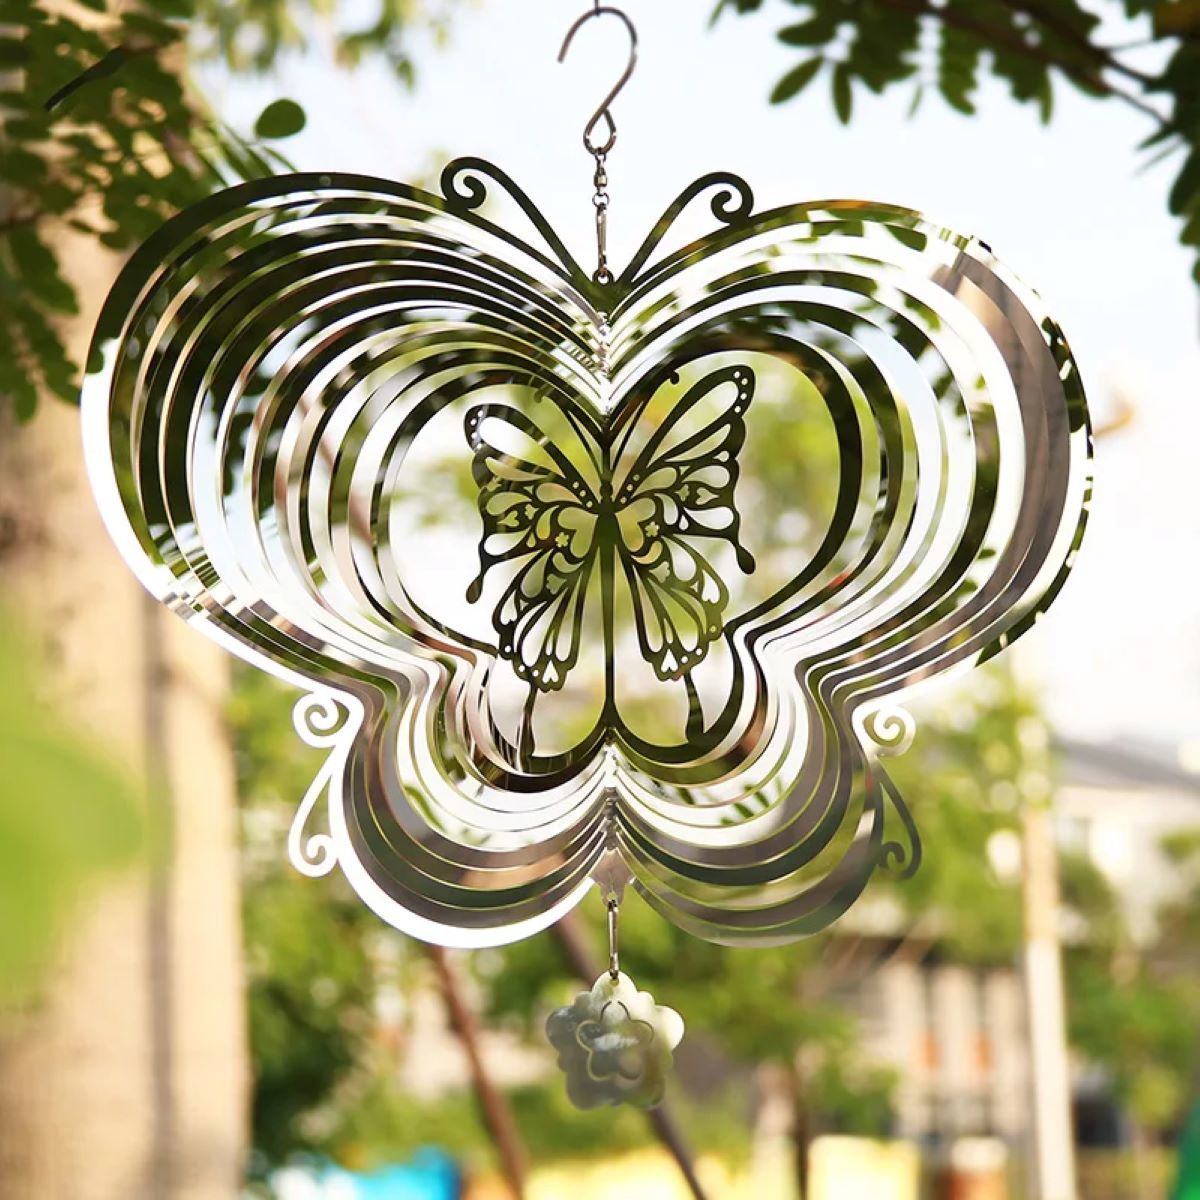 3D Rotating Butterfly Wind Spinner, Garden Hanging Décor, Outdoor Balcony Chime - $29.99